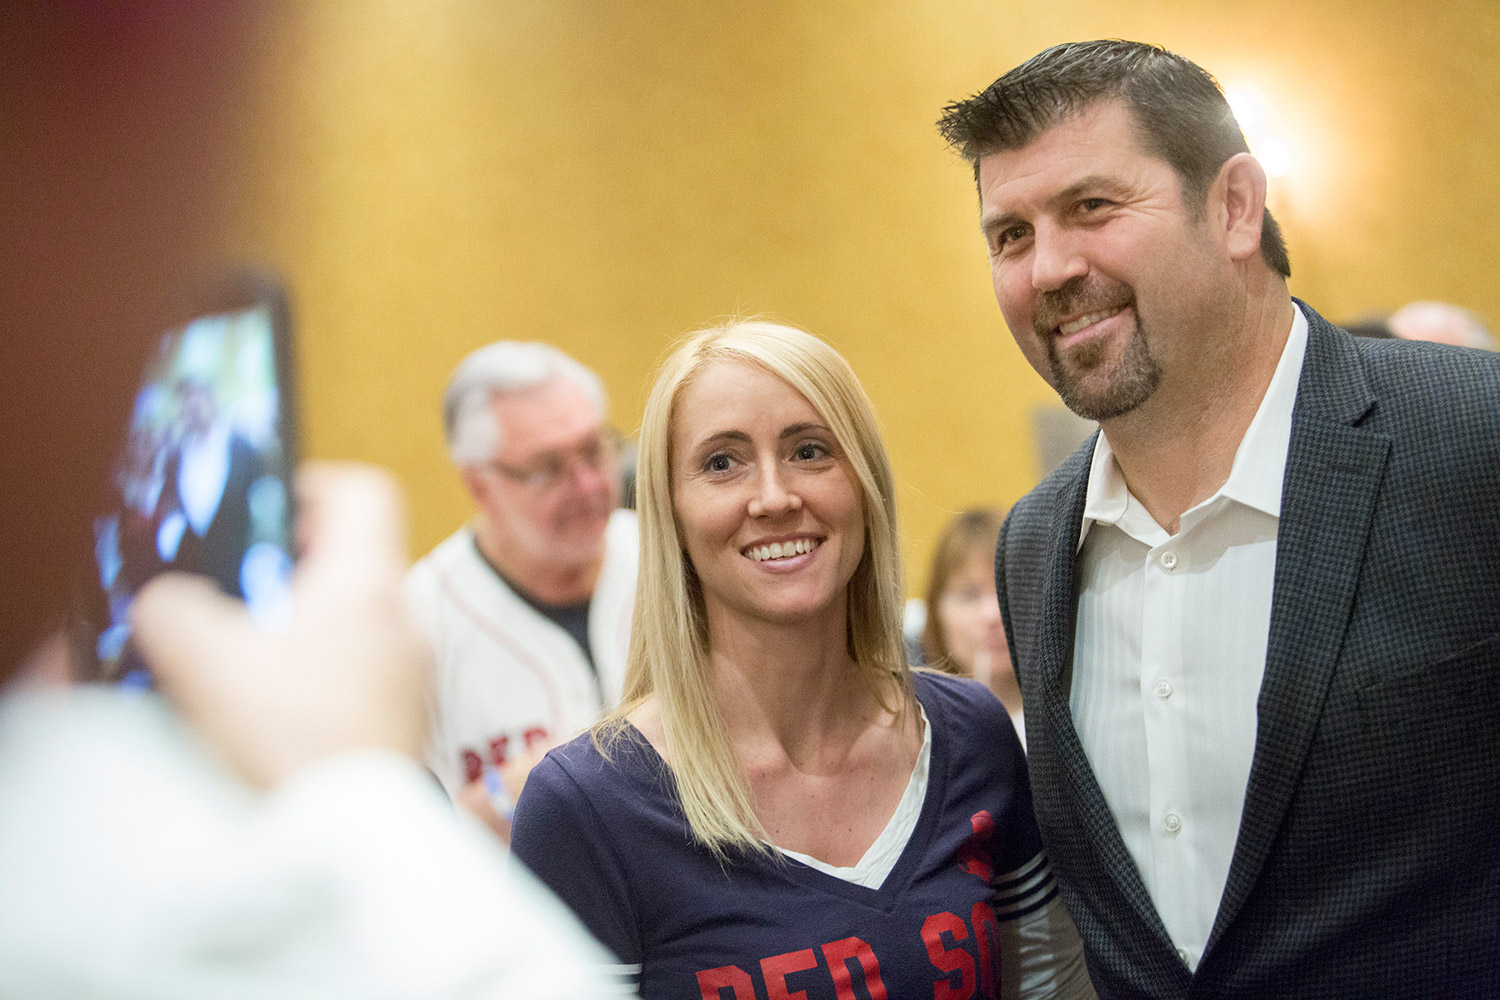 Jason Varitek, as popular as ever in Maine, poses for a photograph Friday with Angela Pease of Augusta at the Portland Sea Dogs' annual Hot Stove Dinner.